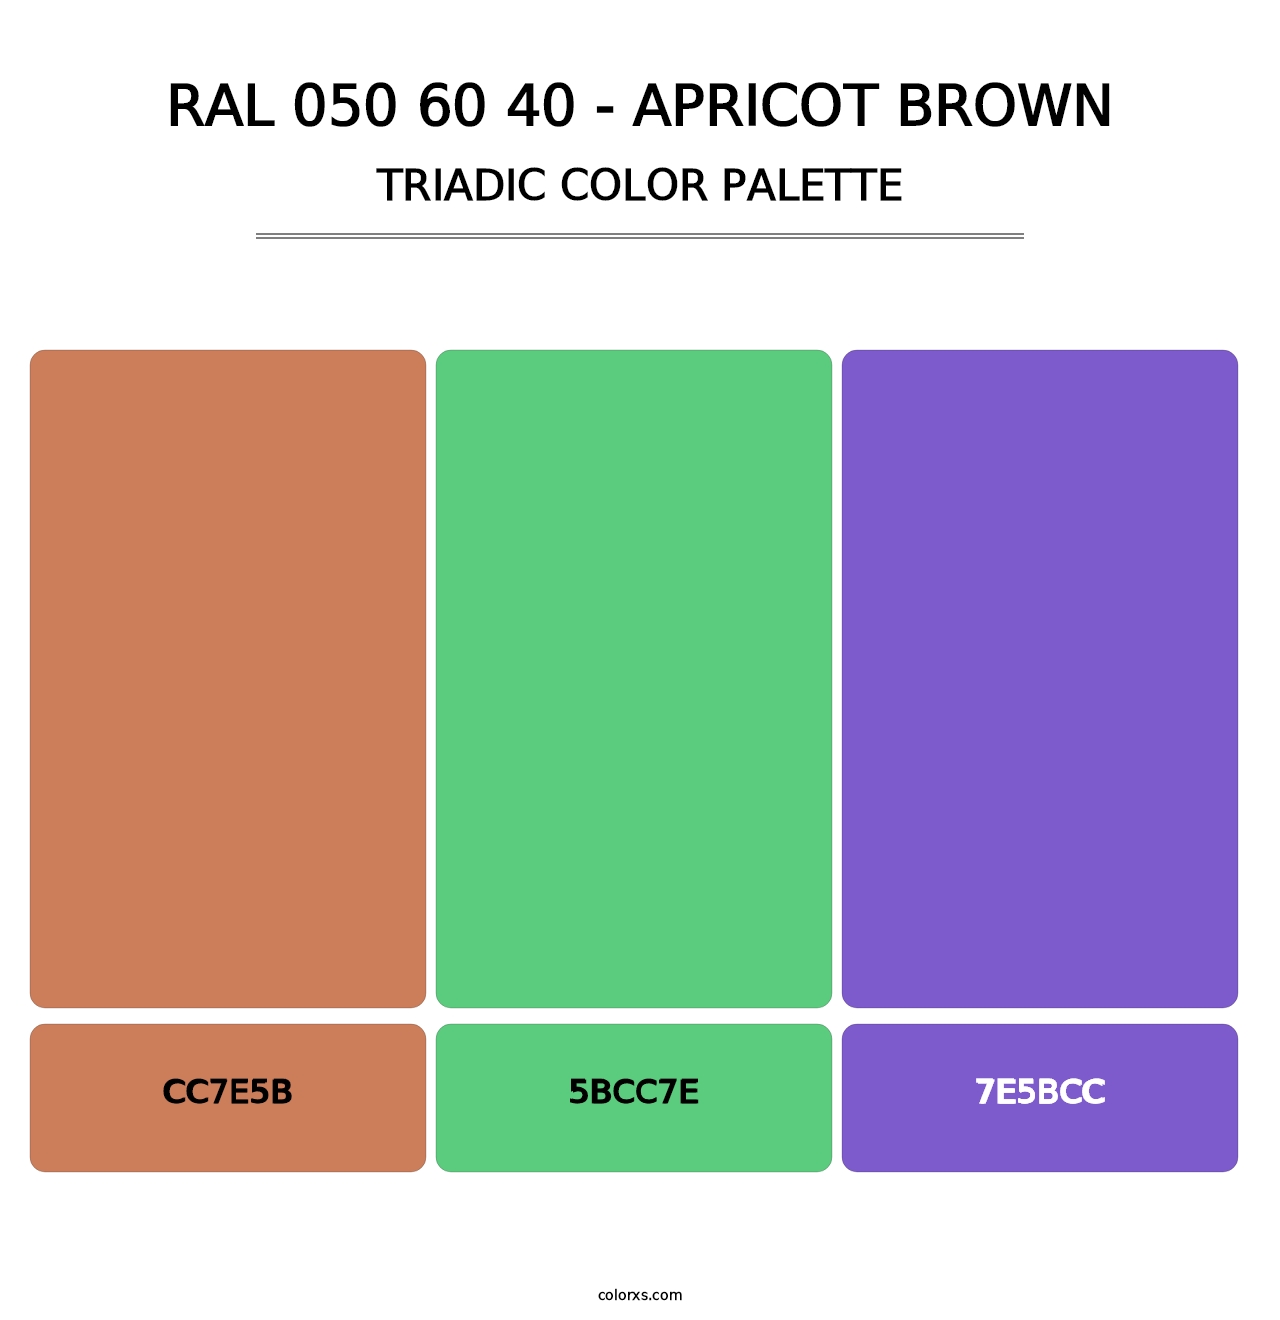 RAL 050 60 40 - Apricot Brown - Triadic Color Palette